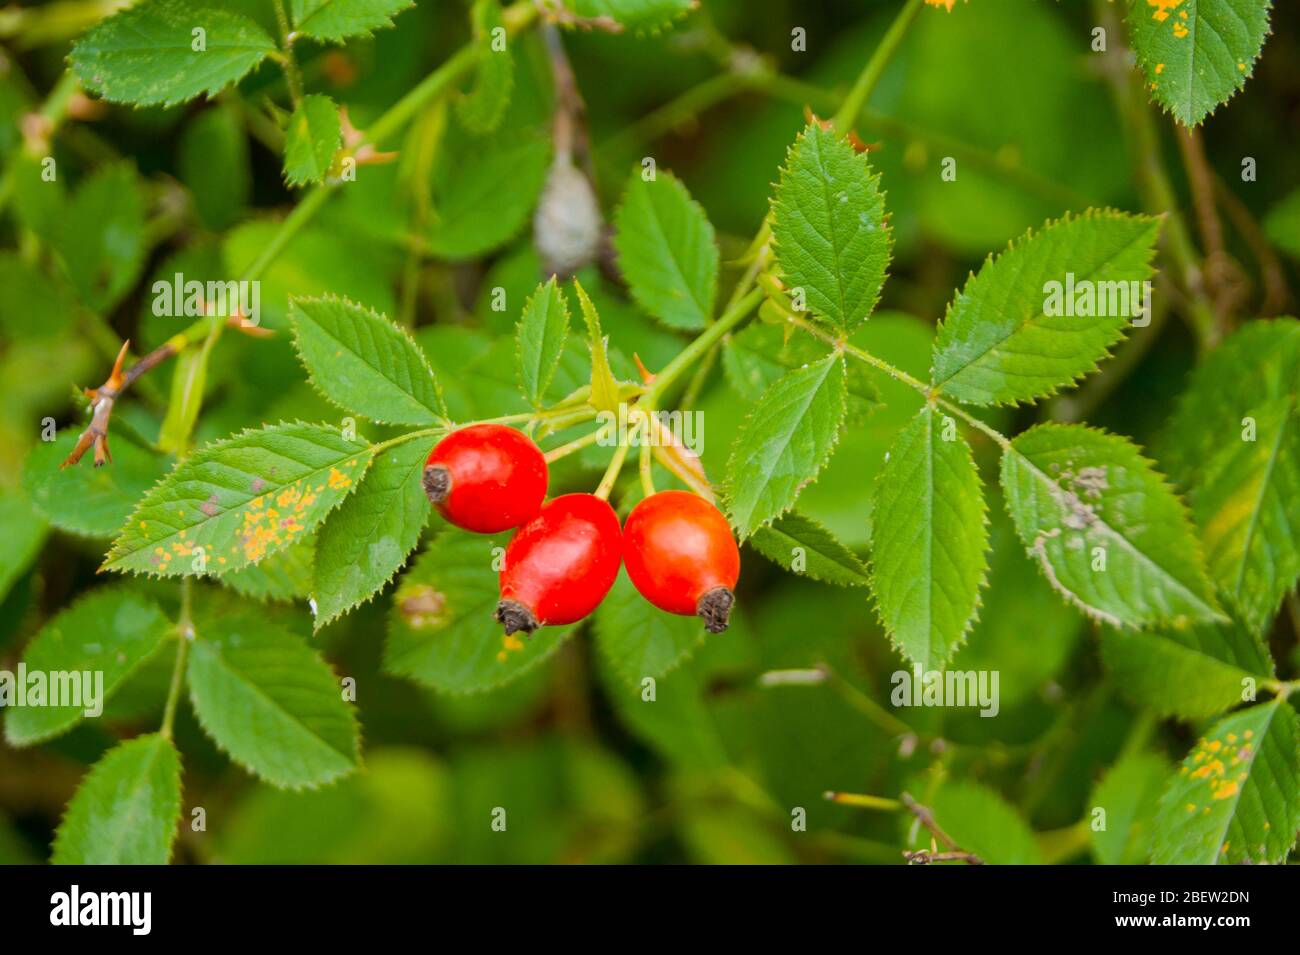 Three berries of red rosehip fruits against the background of green foliage. Summer, warmth, gifts of nature, useful plants Stock Photo